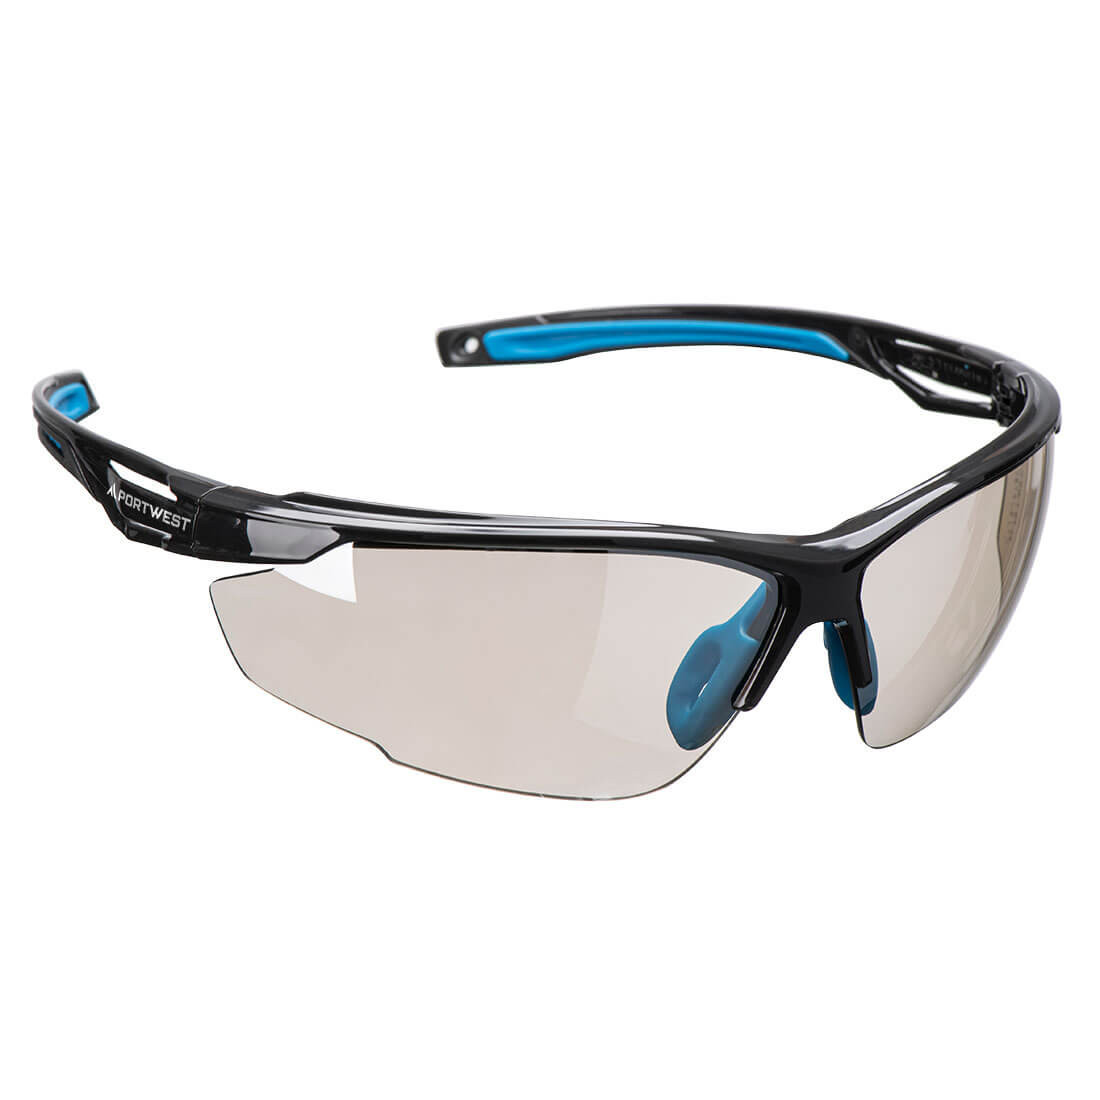 Anthracite KN Safety Glasses - Personal protection